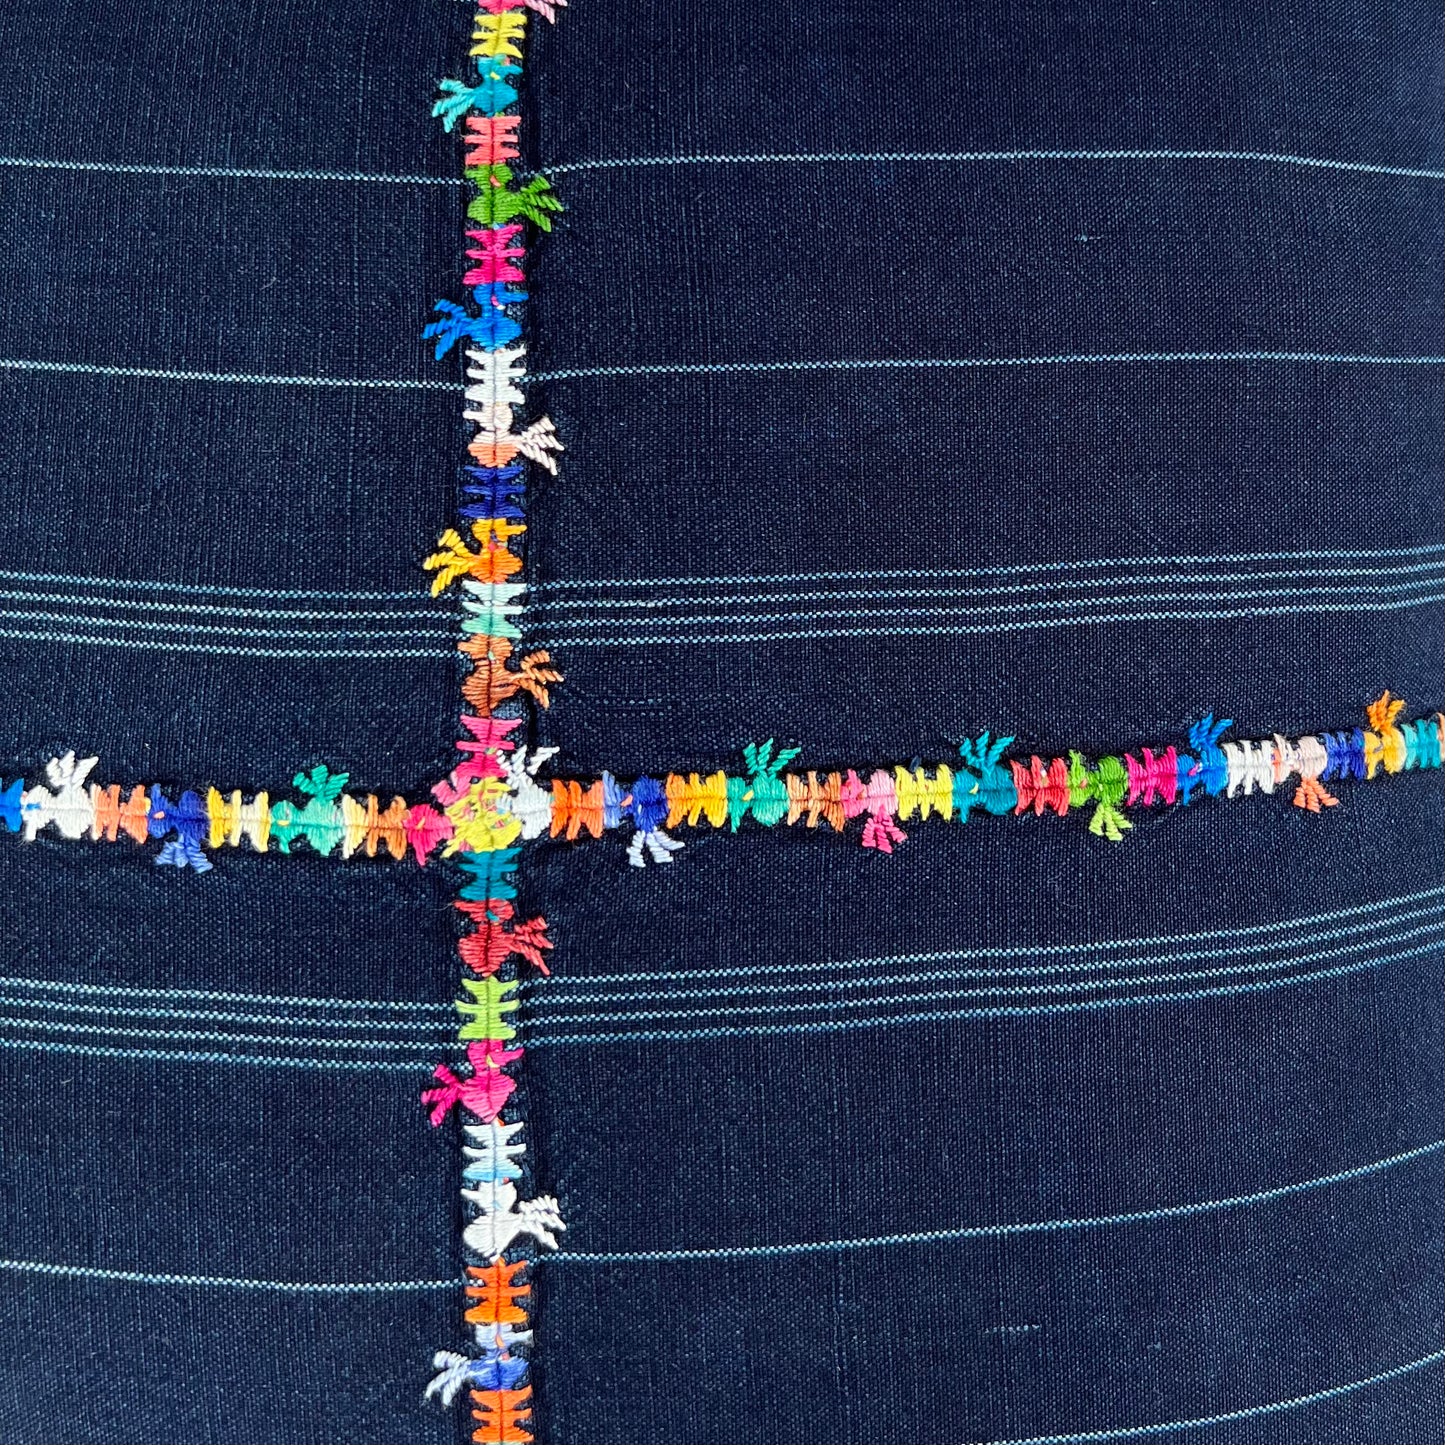 Close up of the multicolor embroidered cross on the indigo corte pillow.